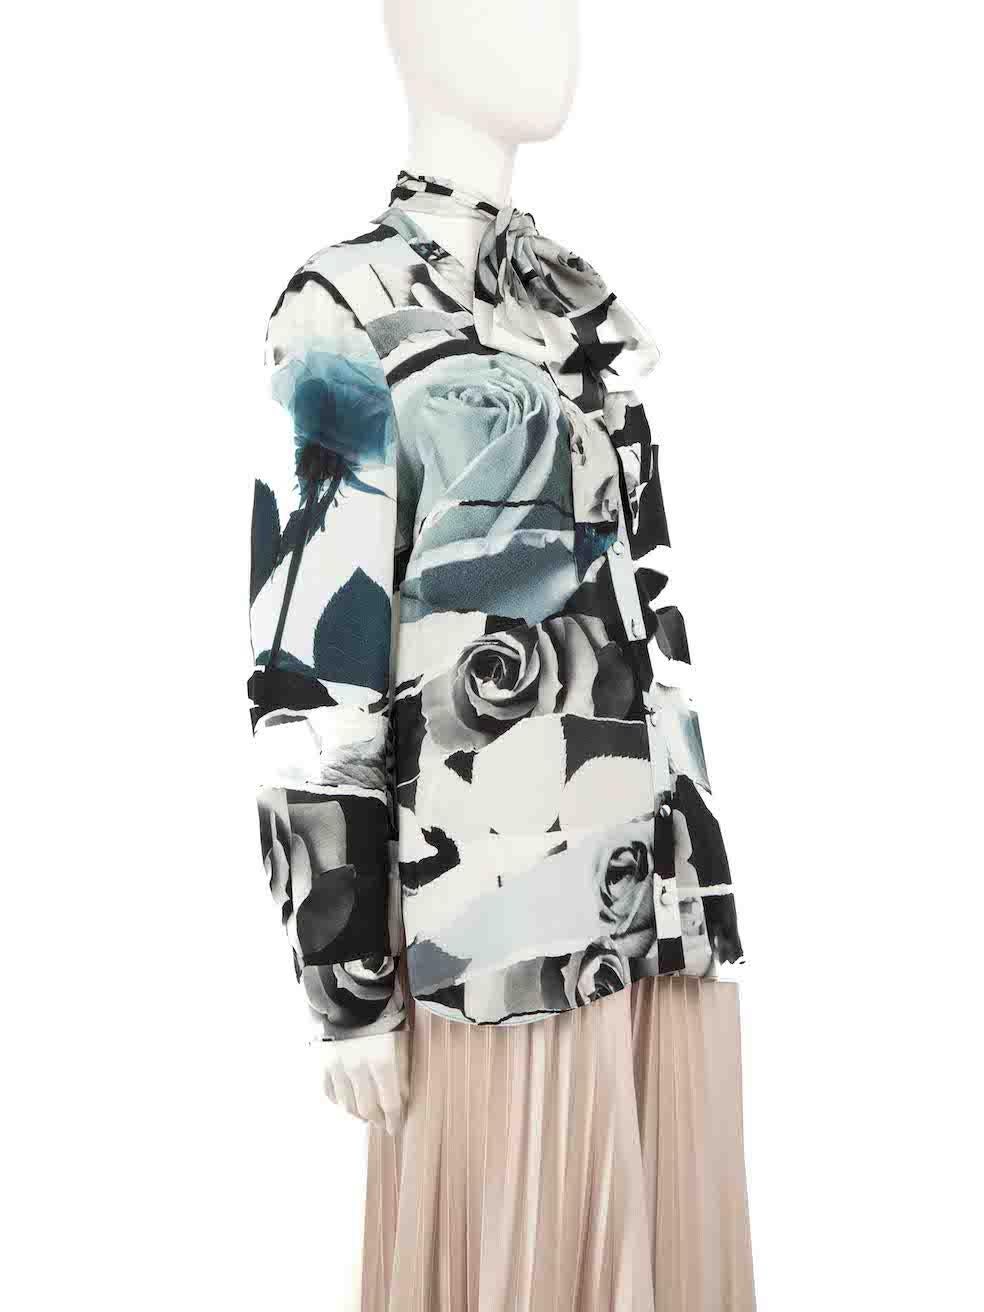 CONDITION is Very good. Minimal wear to blouse is evident. Minimal pulls to the weave on the sleeves on this used Alexander McQueen designer resale item.
 
 
 
 Details
 
 
 Blue
 
 Silk
 
 Blouse
 
 Torn Rose print
 
 Long sleeves
 
 Front neck